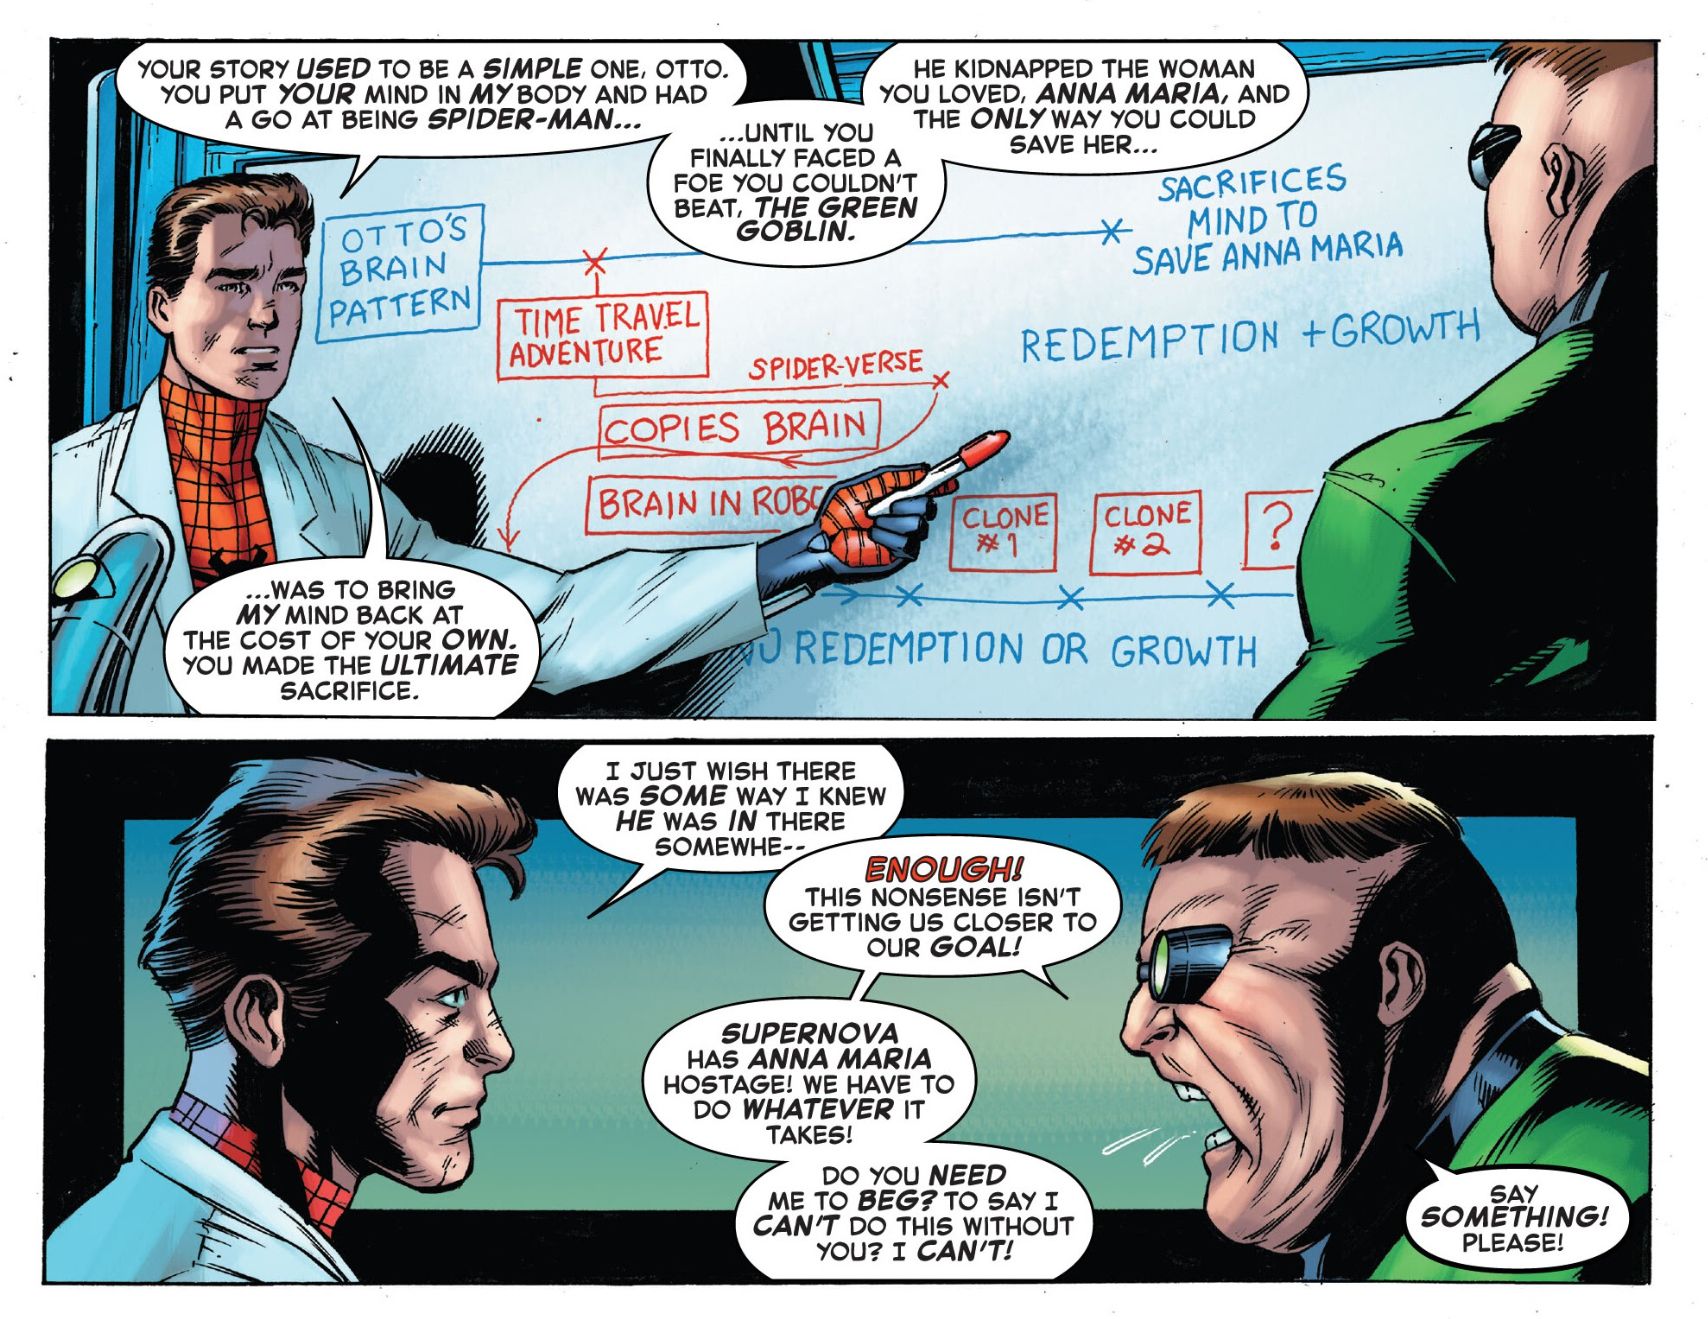 Top panel: Peter Parker, in a lab coat over his Spider-Man costume, describes a convoluted flowchart documenting Doctor Octopus's personal growth across the Marvel timeline. Bottom Panel: Spider-Man and Doctor Octopus face each other, with Doctor Octopus begging for Spider-Man's help to save the kidnapped Anna Maria.